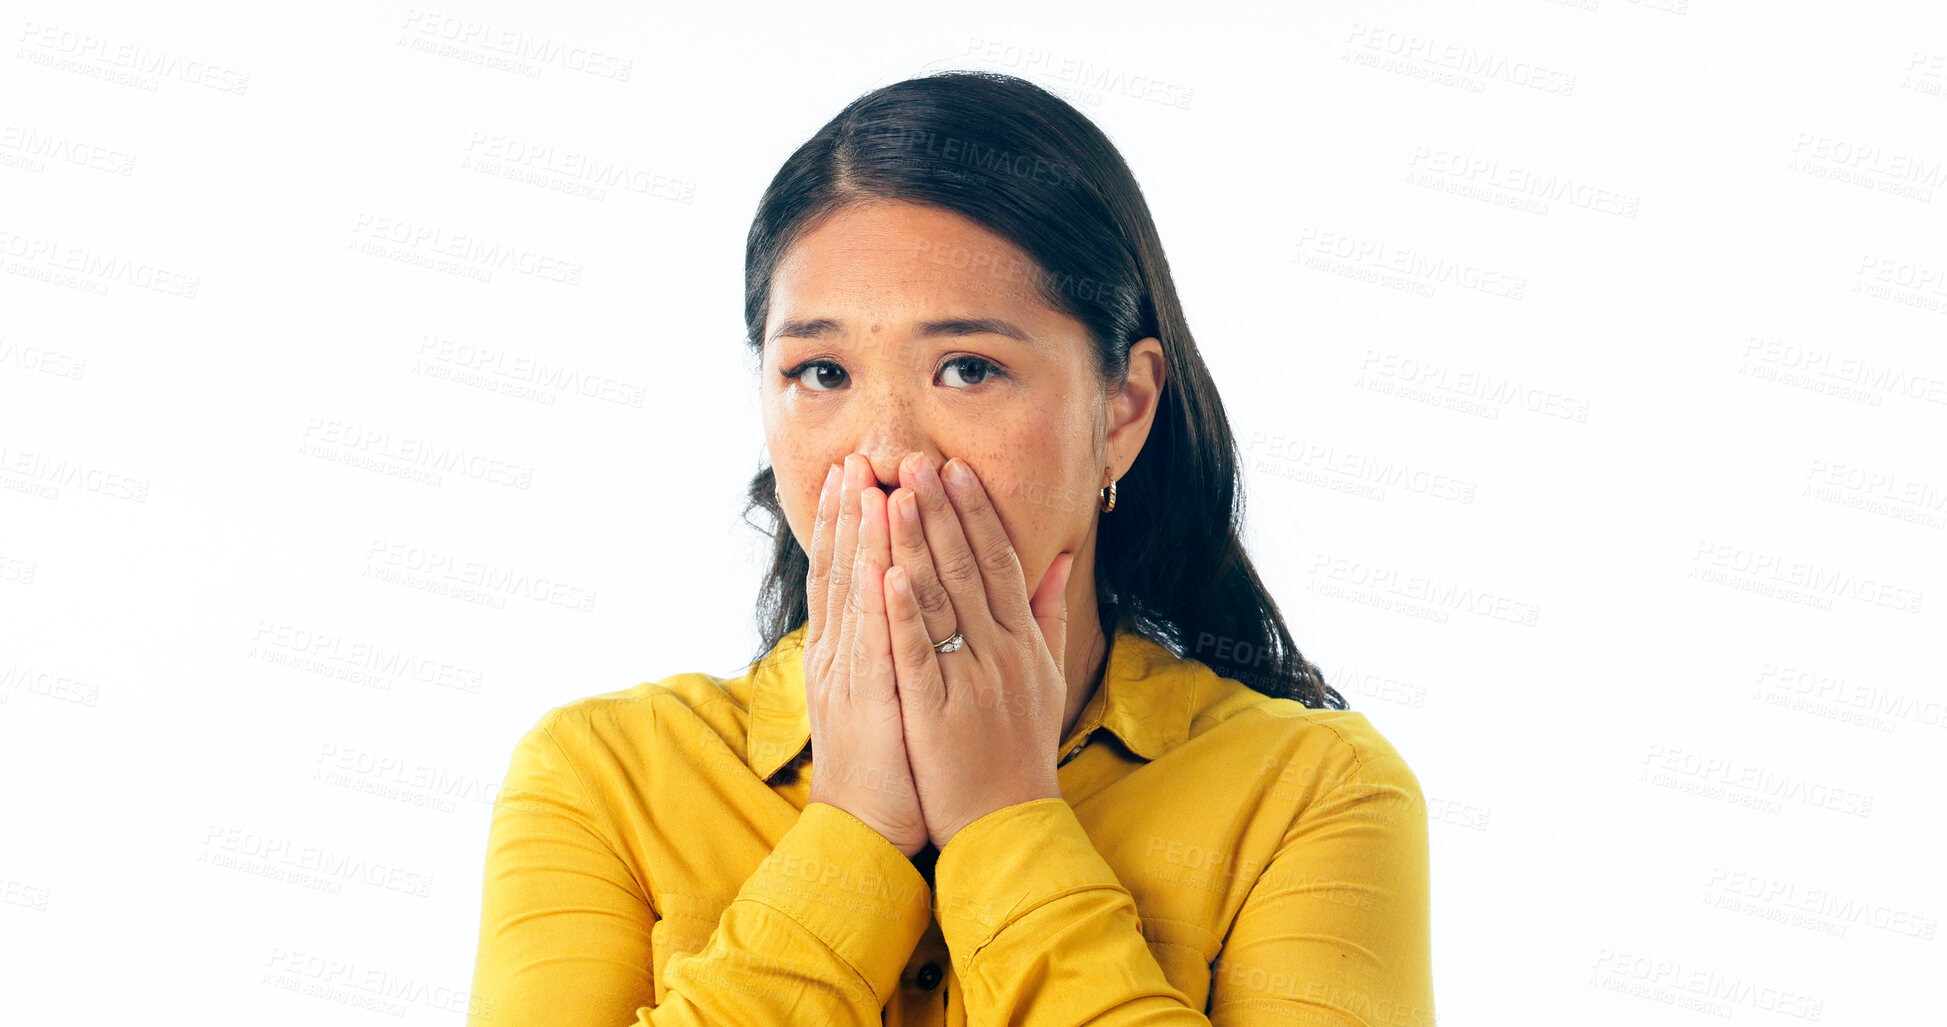 Buy stock photo Wow, surprise and hands on face of woman in studio with bad news, mistake or oops emoji on white background. Omg, shock and portrait of lady model with fail, crisis or sorry, regret or gossip drama